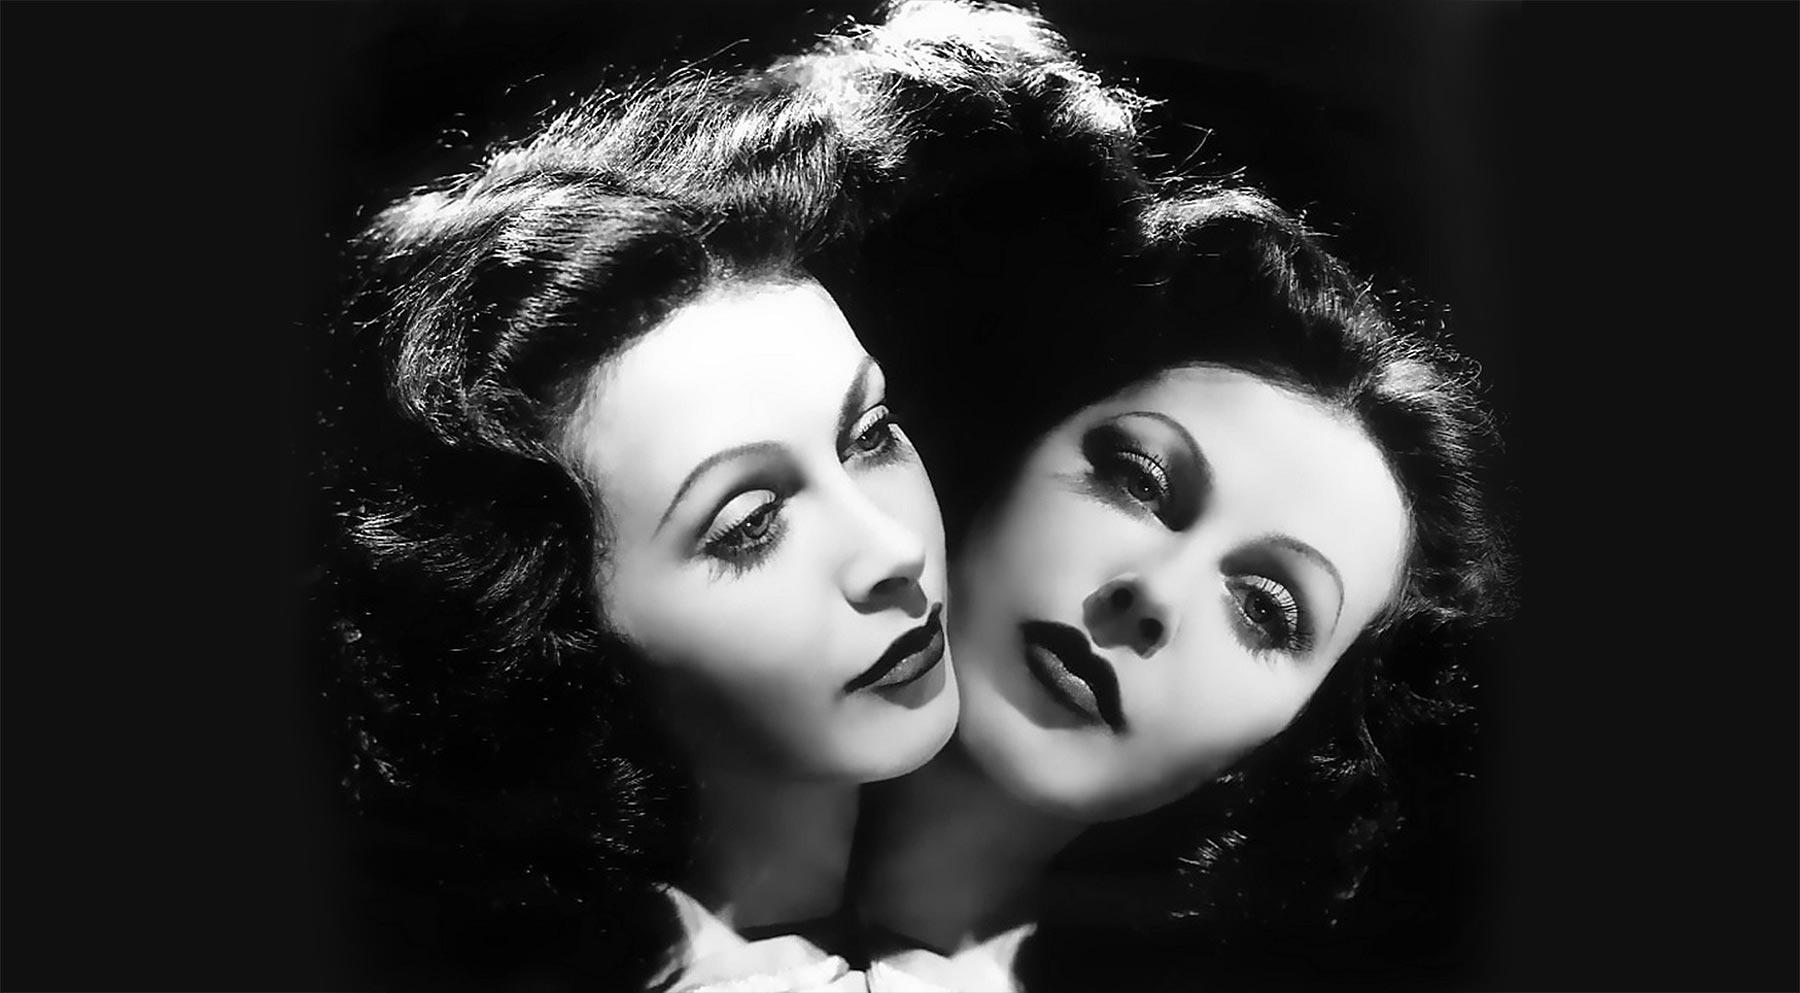 Hedy Lamarr – Hollywood Star and the ‘Mother of WiFi’